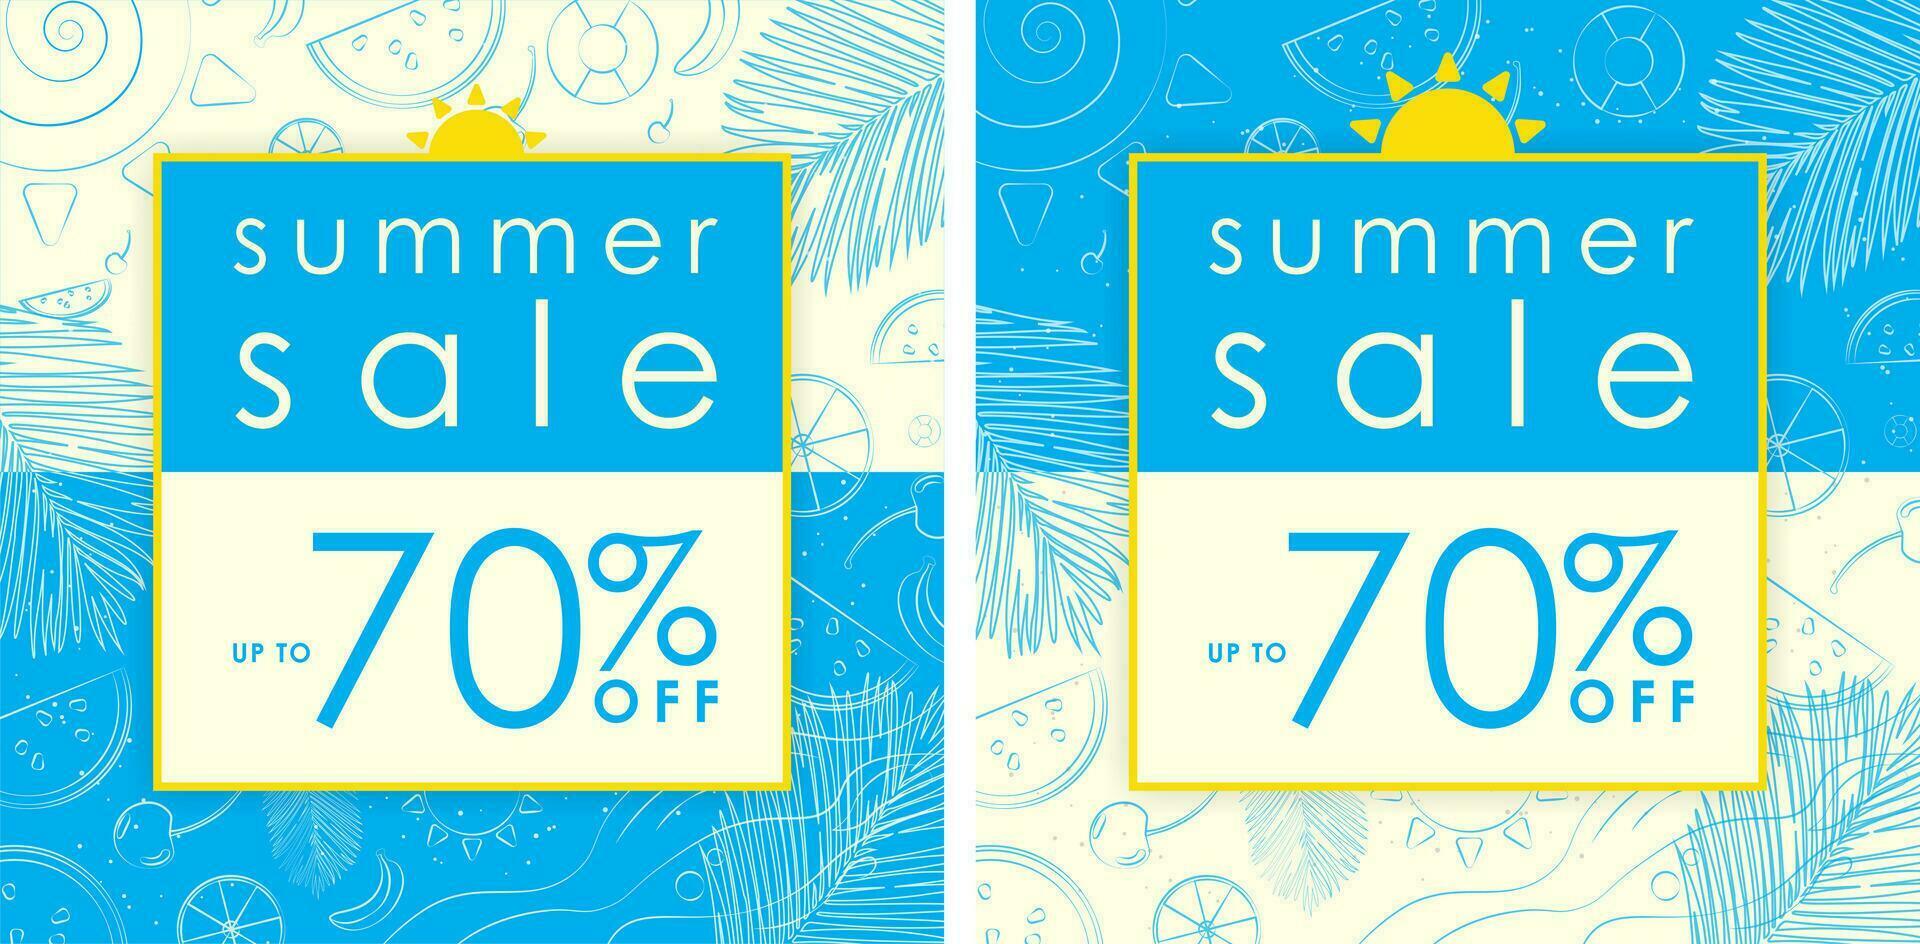 Summer Sale Up to 70 off on Cyan and Light Yellow Background Sale Sign with yellow frame and sun symbol on top. Outline of cherry, lemon, watermelon, sea waves, palm leaf. Free Vector